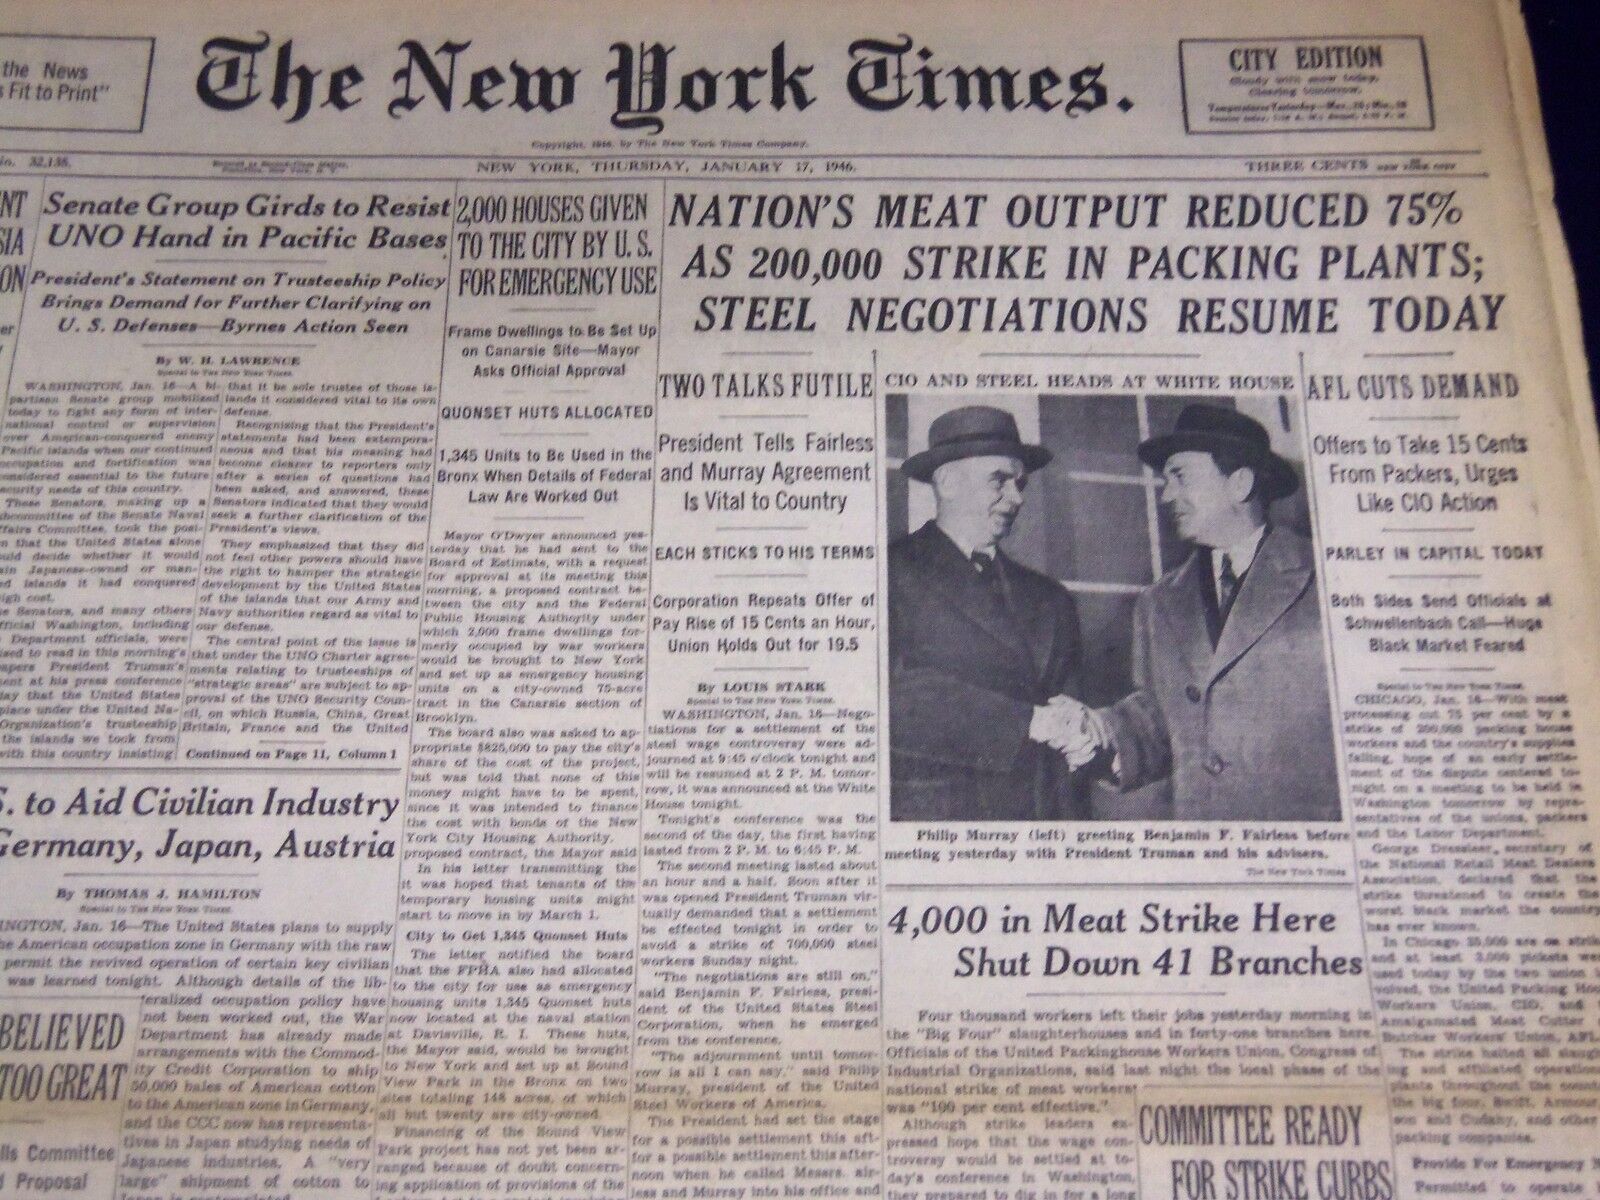 1946 JANUARY 17 NEW YORK TIMES - 200,000 STRIKE IN PACKING PLANTS - NT 3226